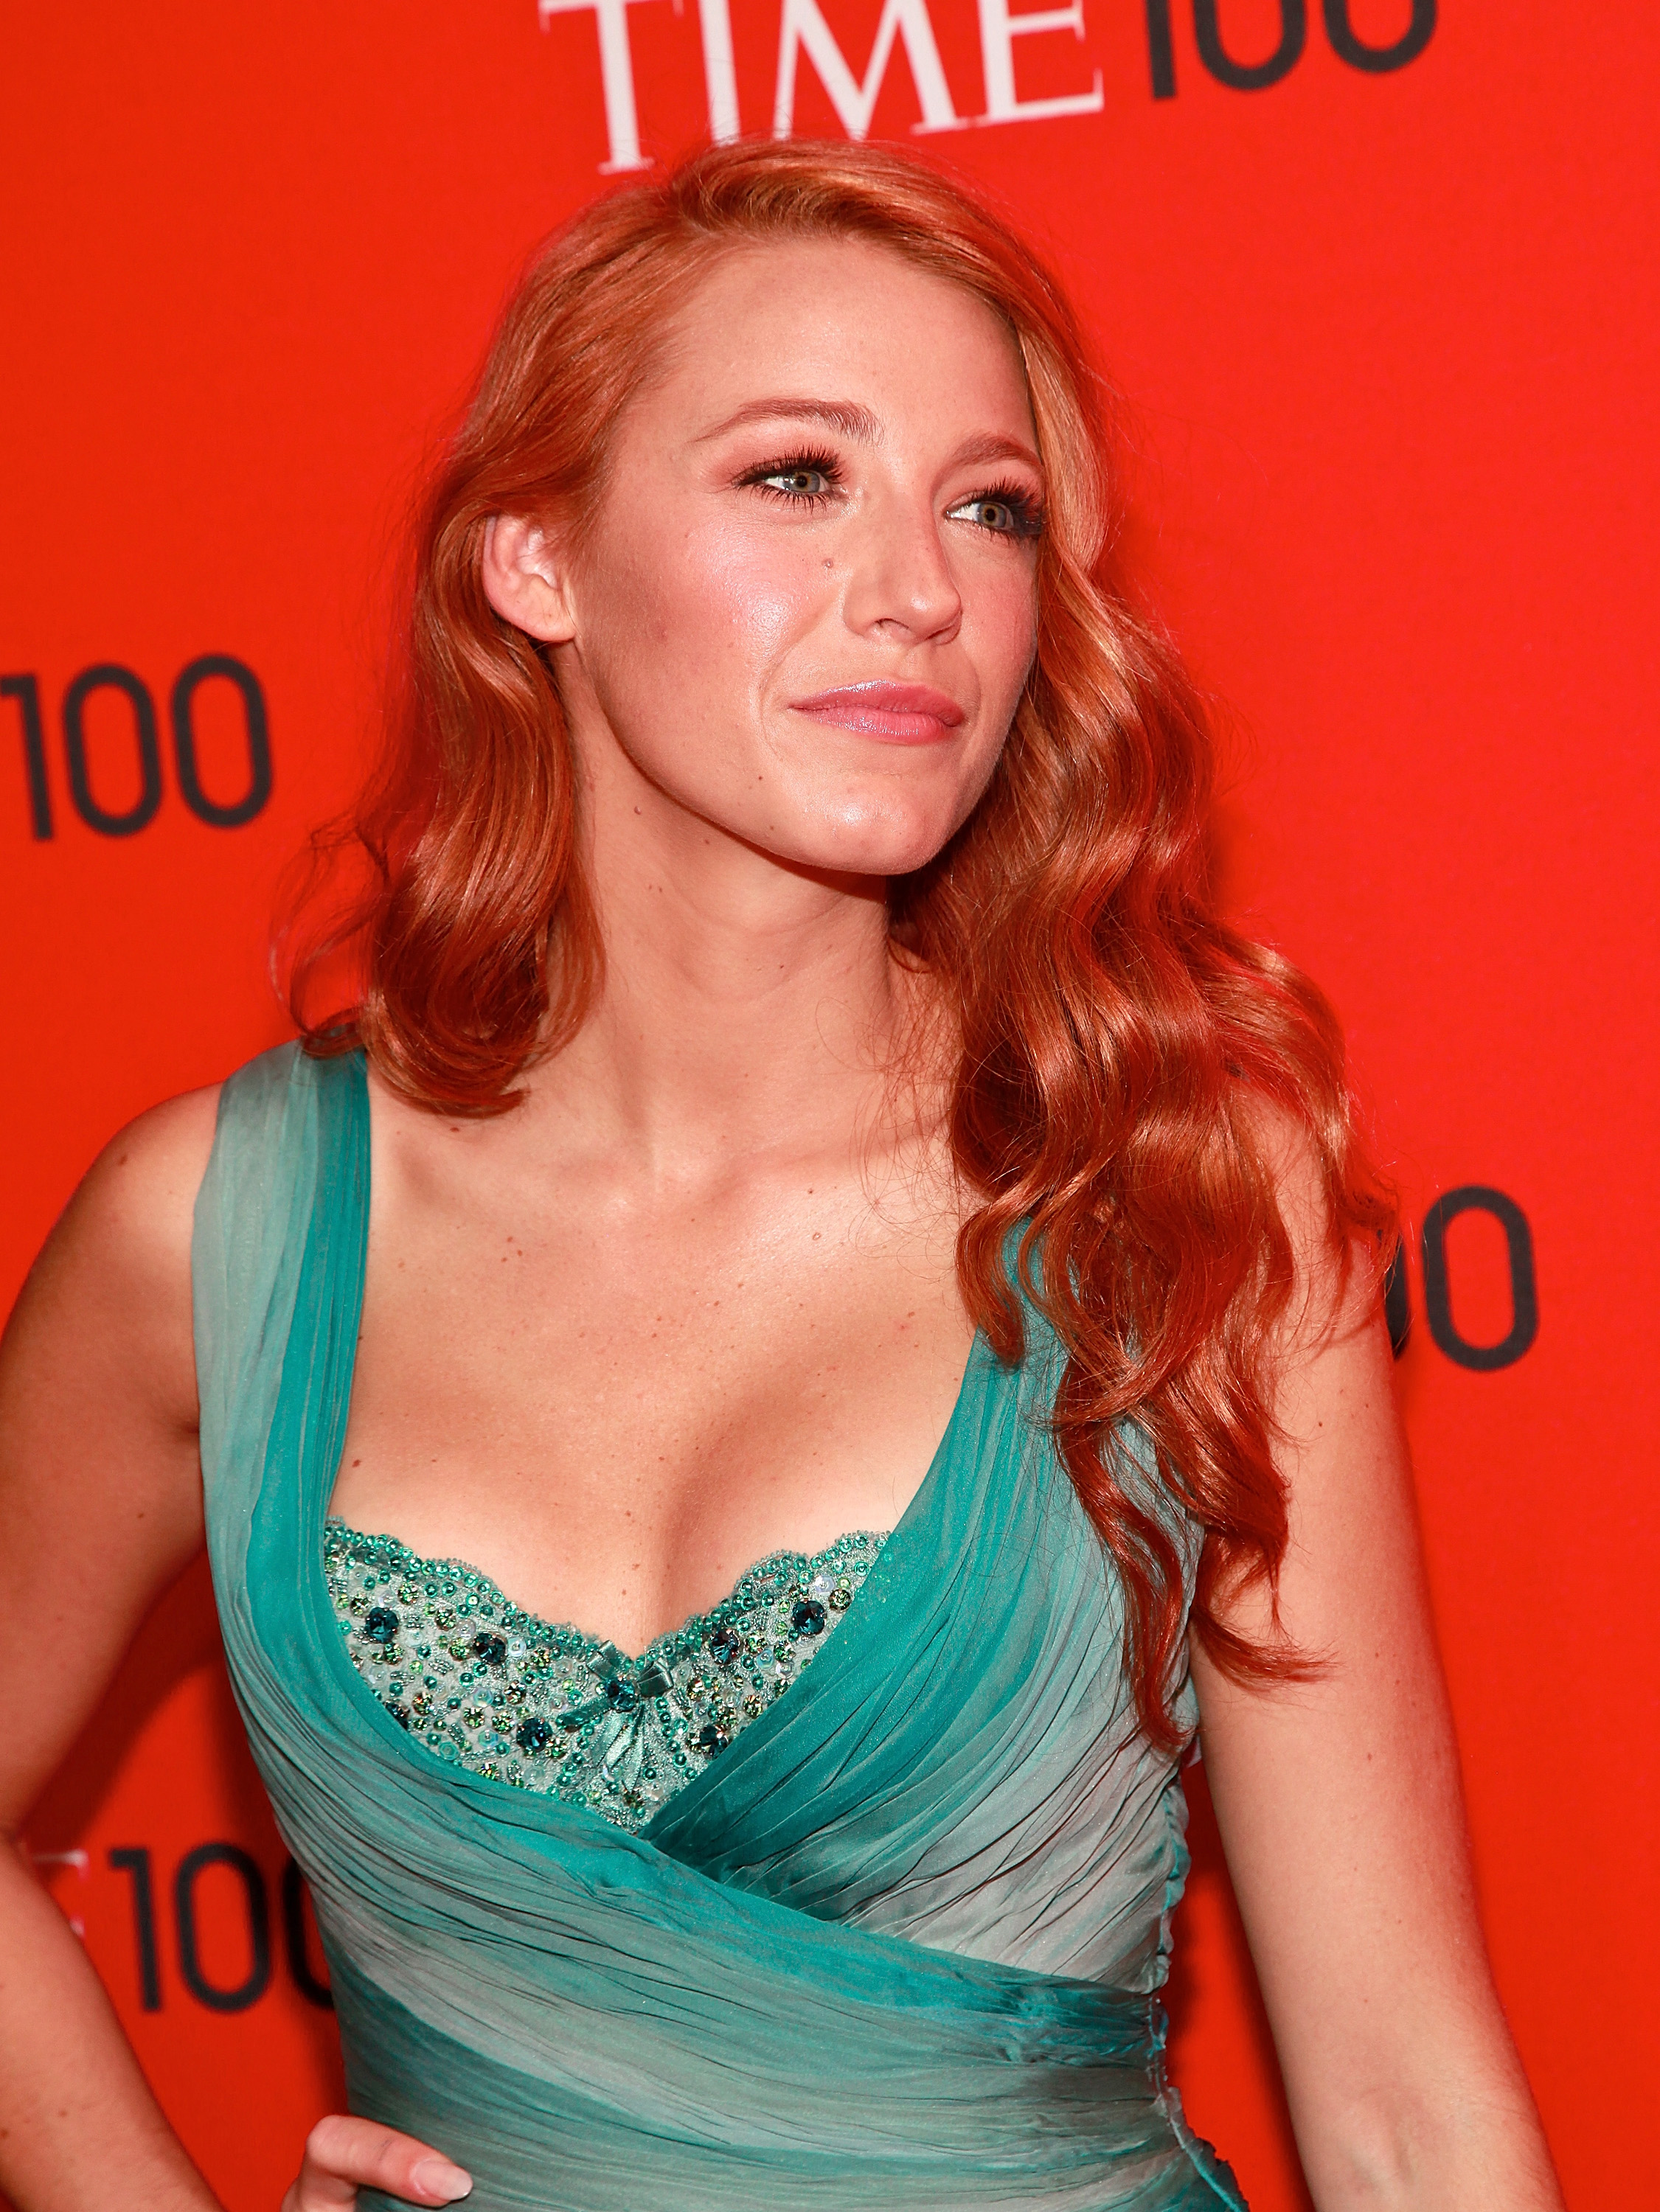 Blake Lively au gala TIME 100, le 26 avril 2011, à New York. | Source : Getty Images